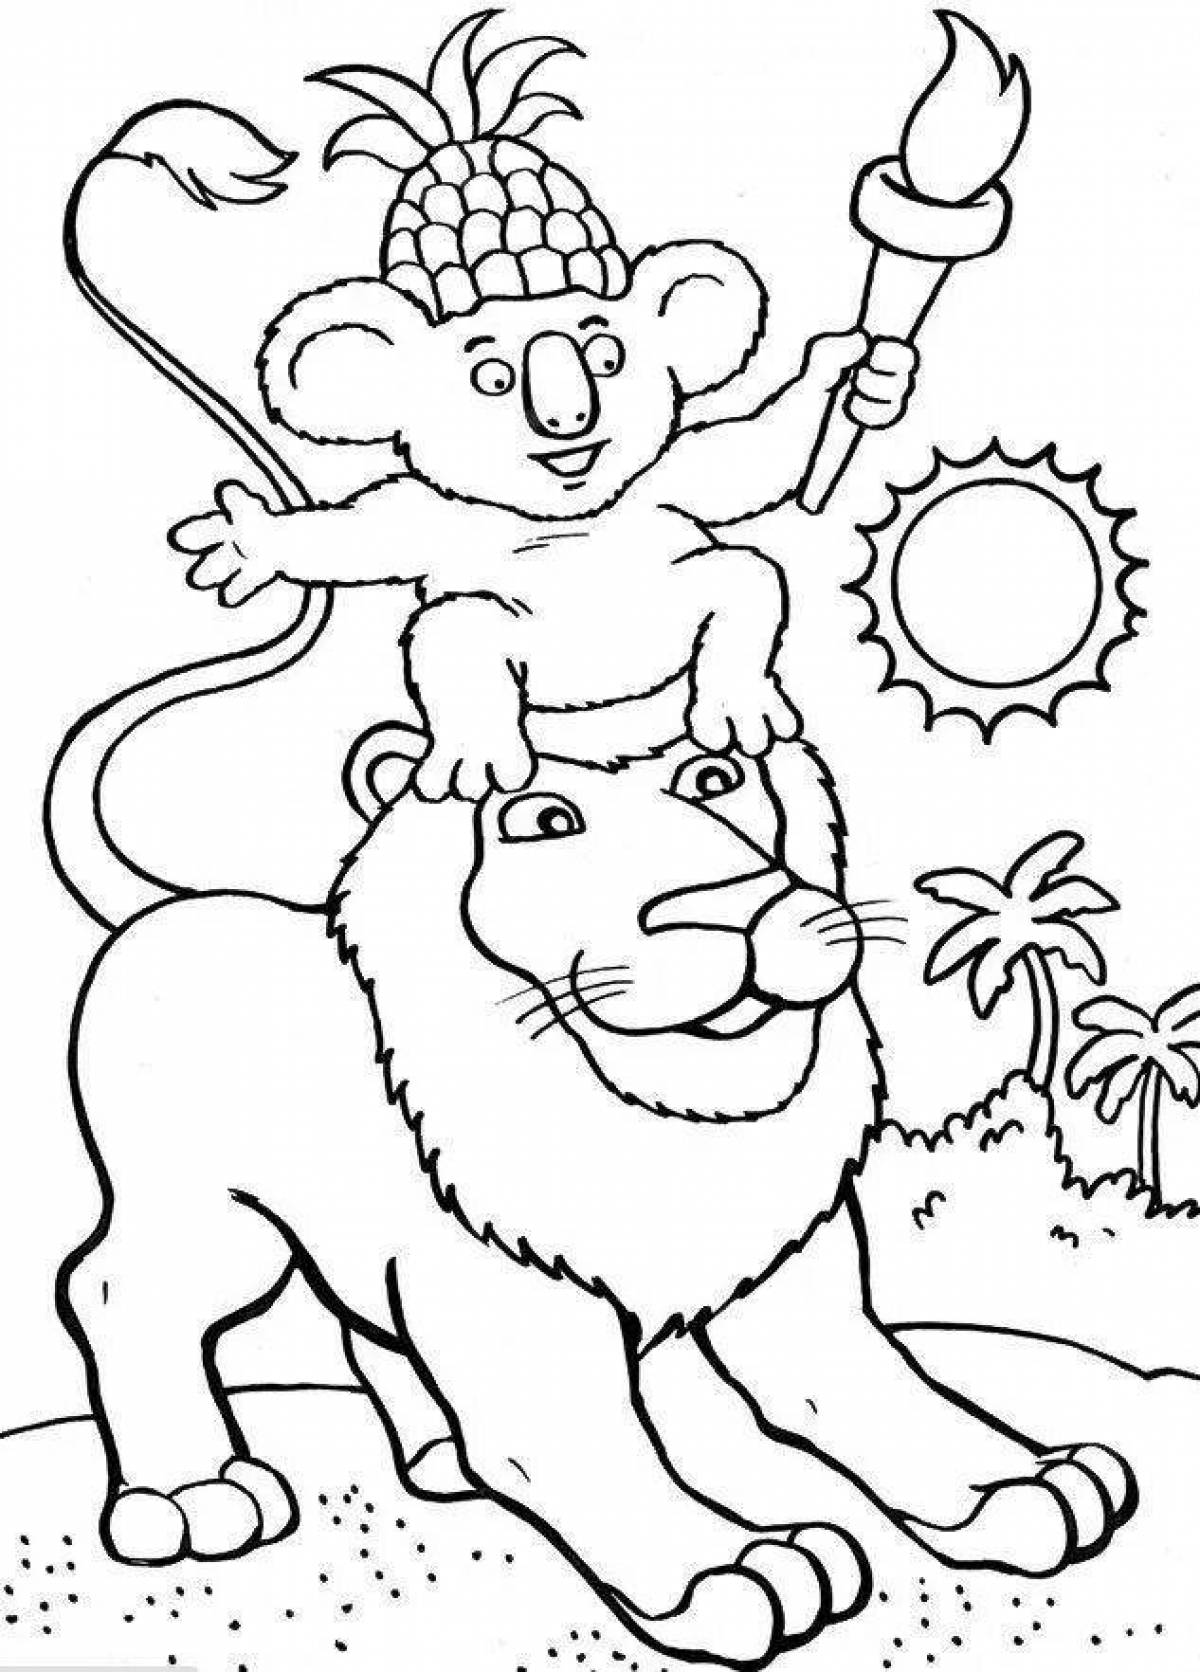 Lovely big adventure coloring book